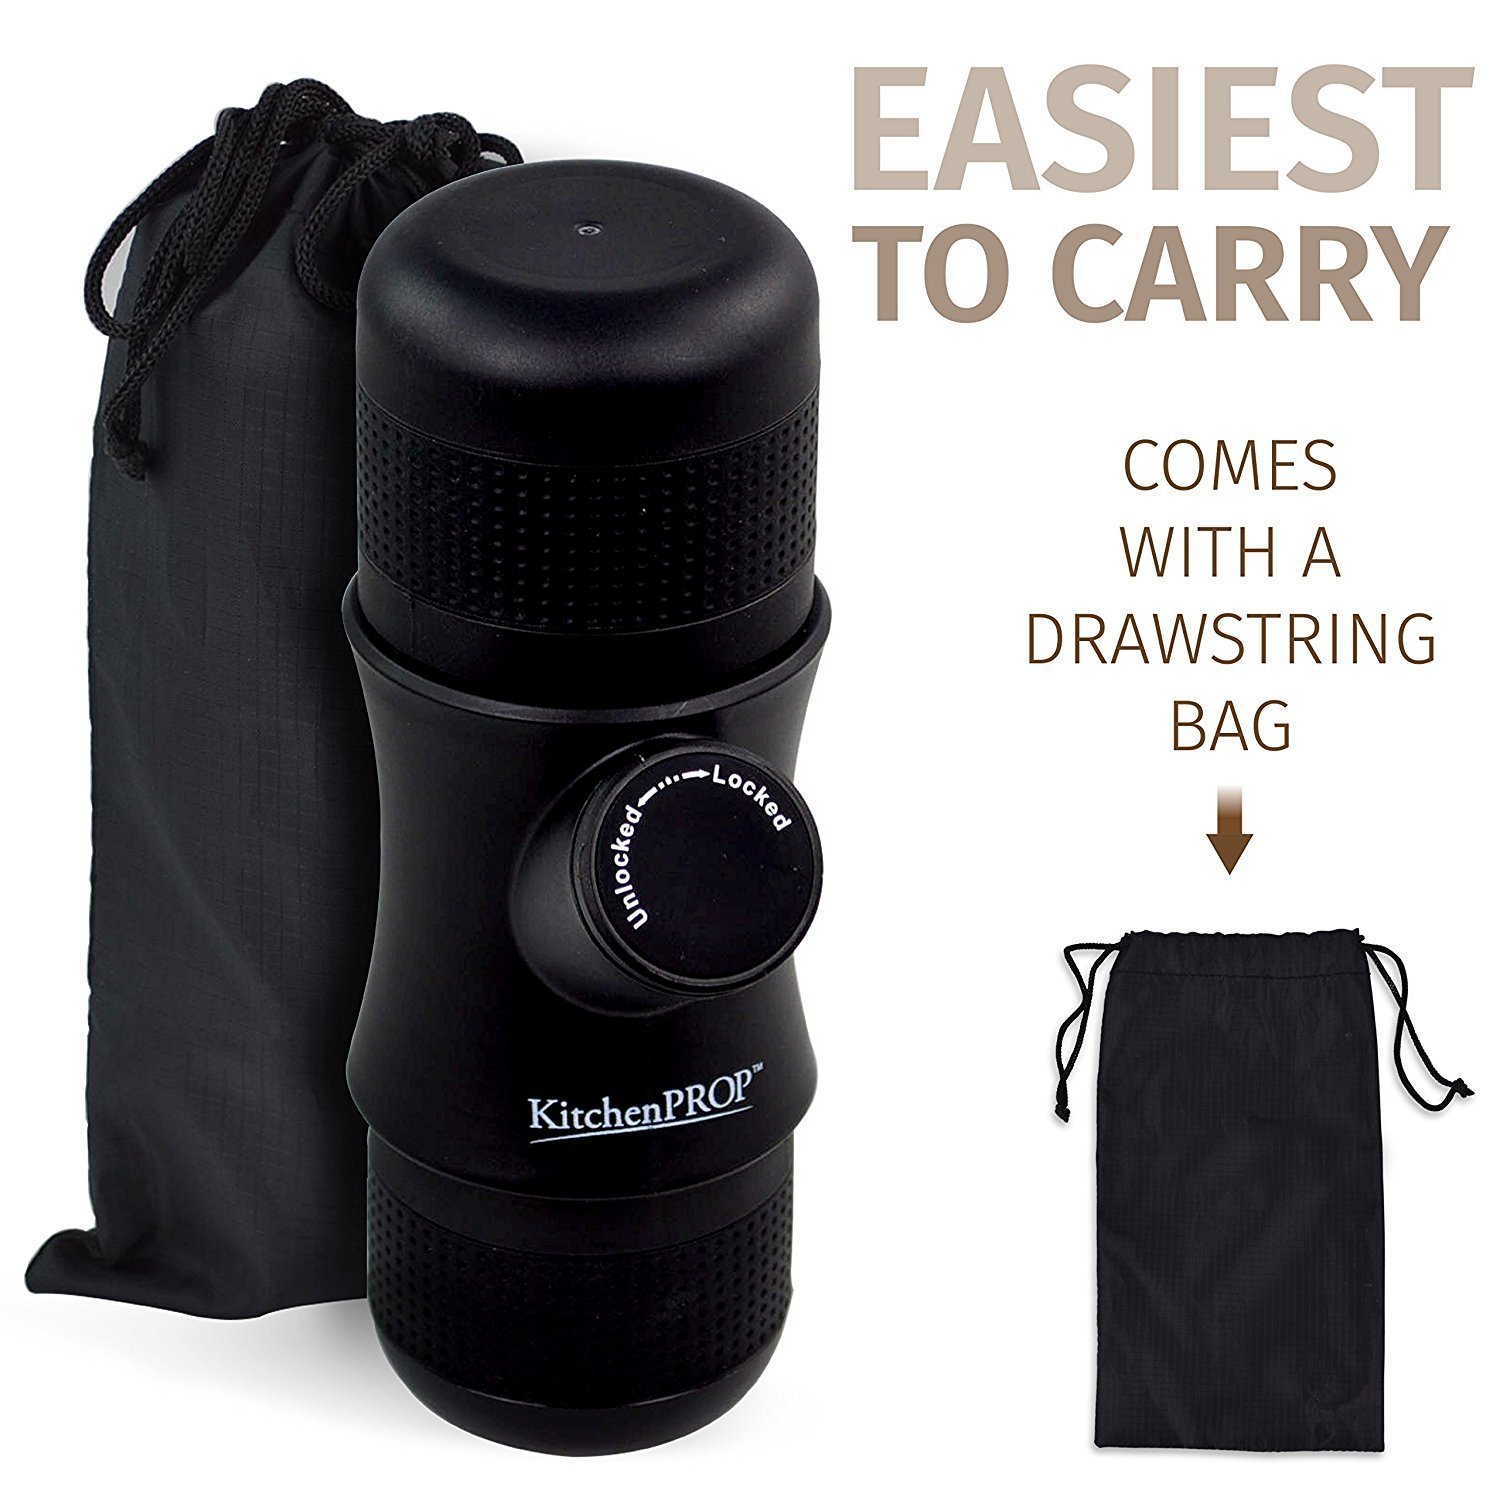 Mini Handheld Espresso Maker with Carrying Bag-Portable